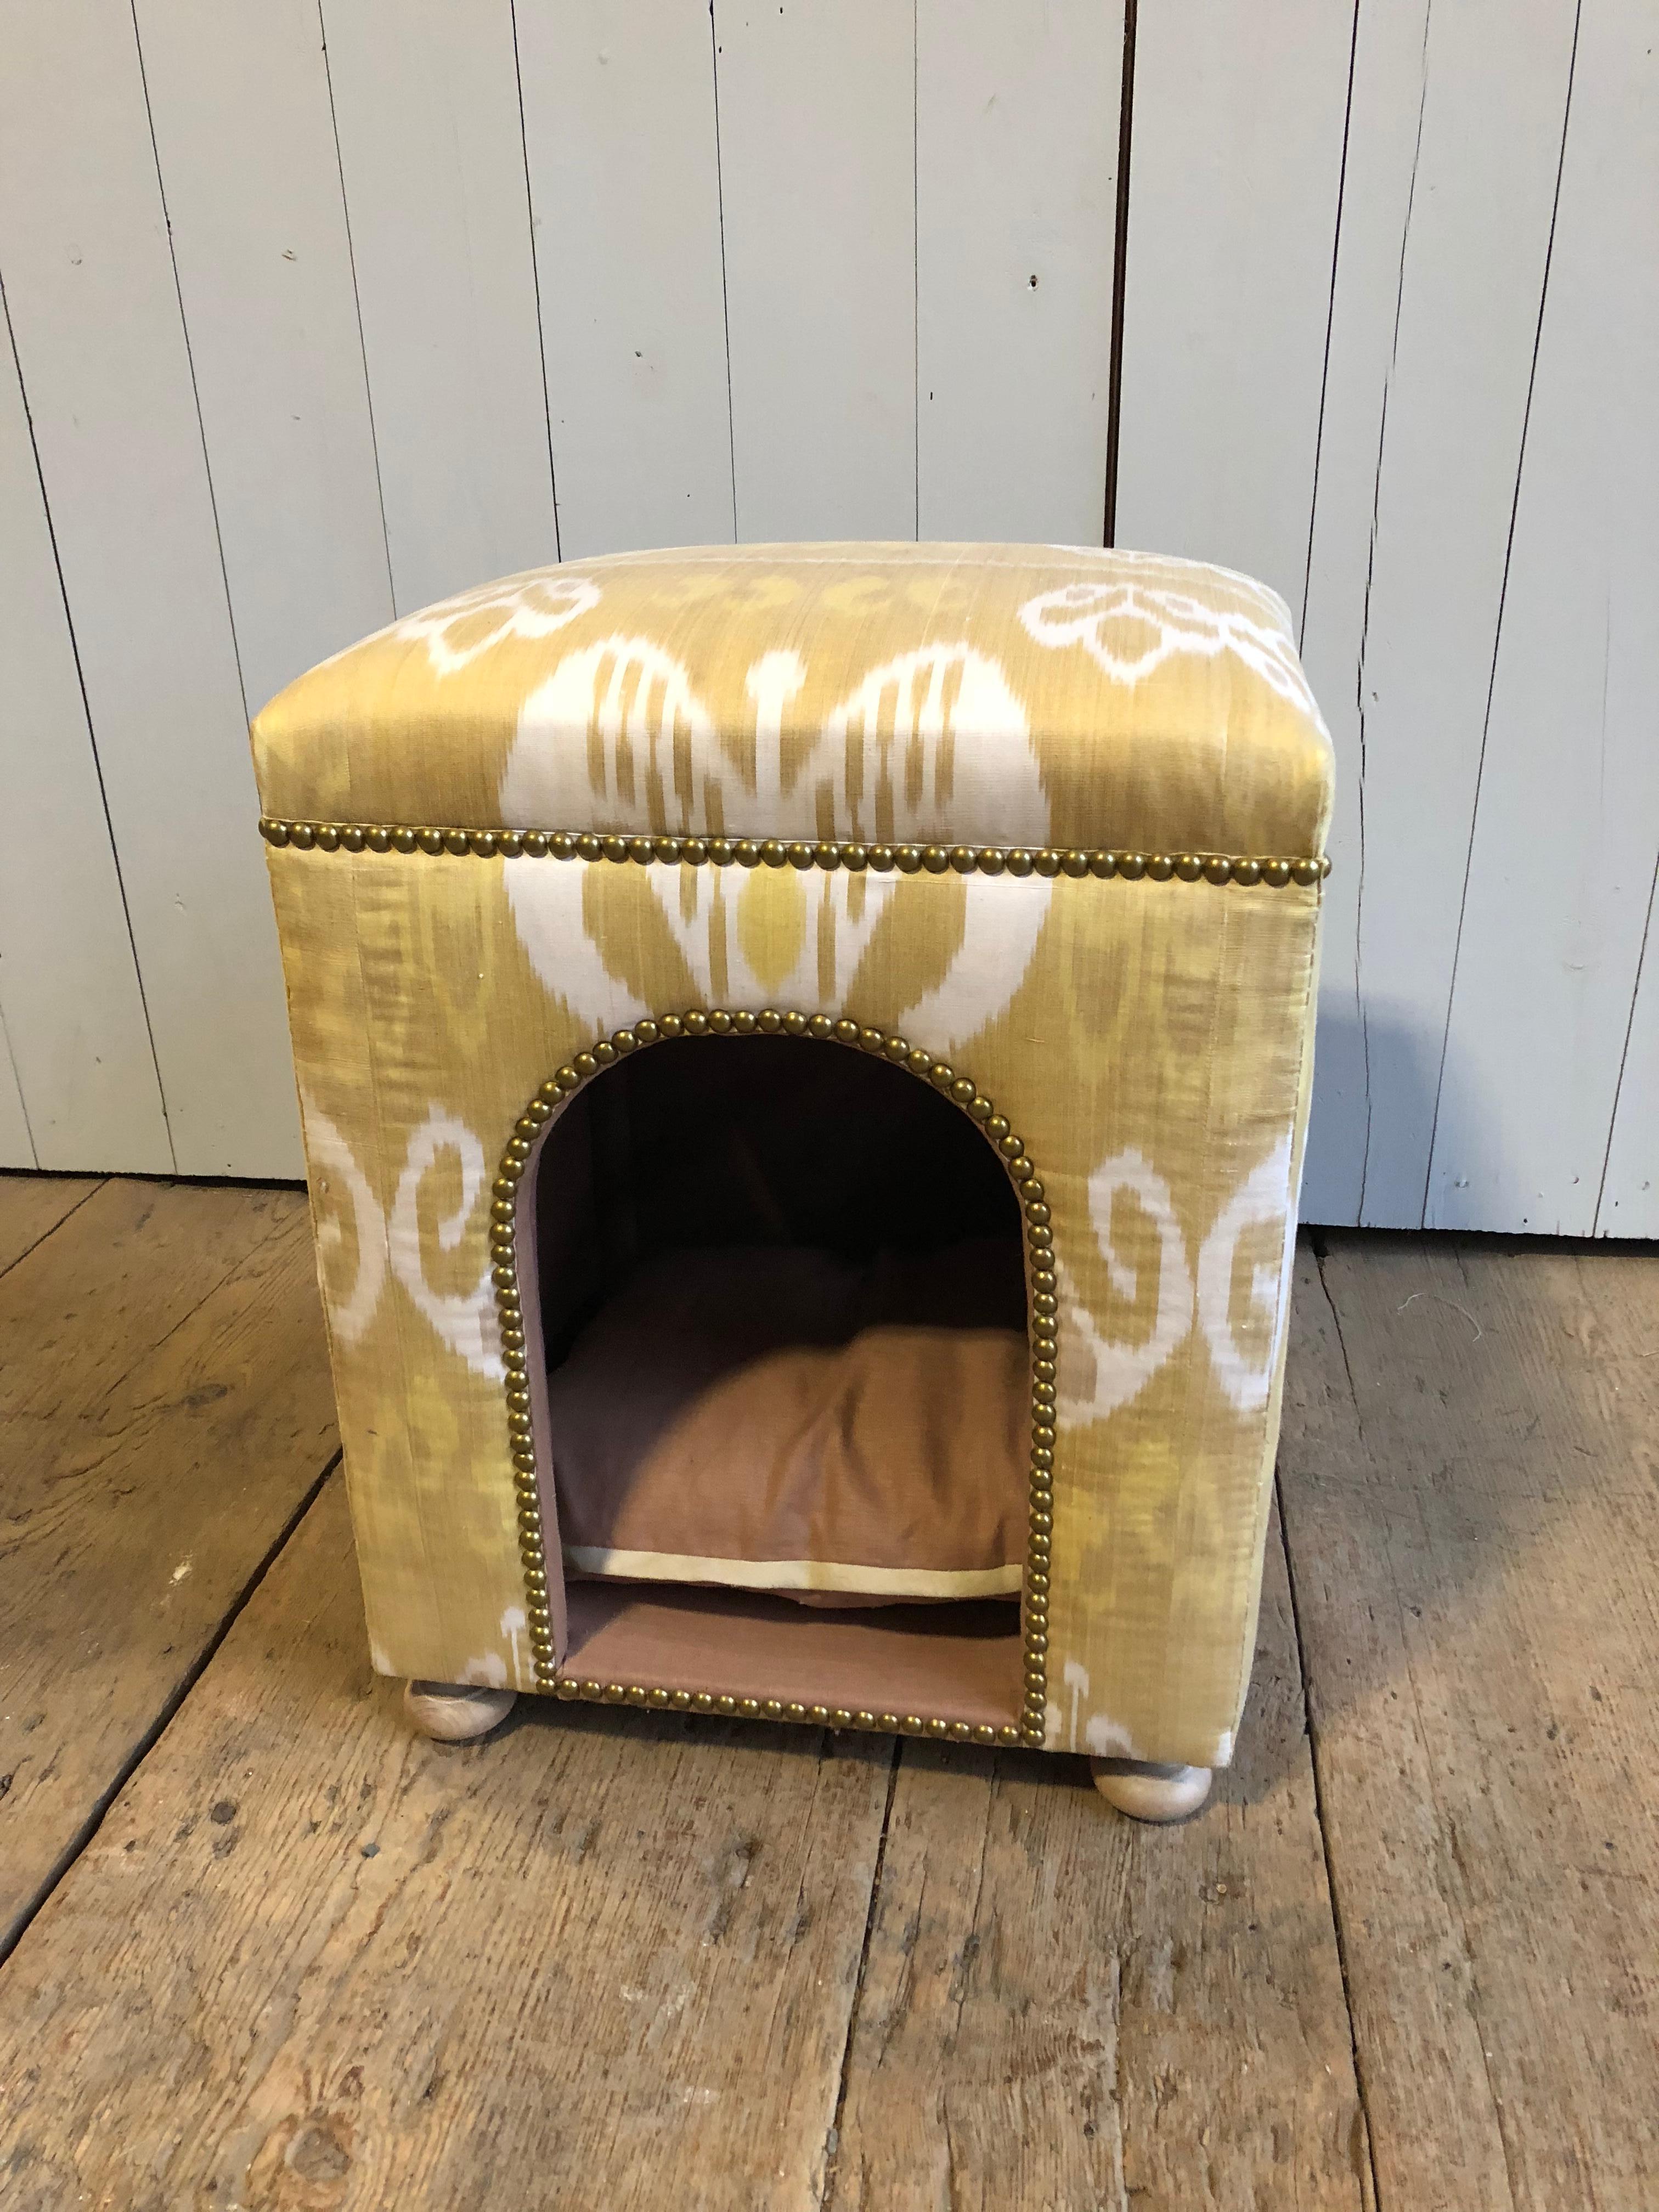 A custom dog bed upholstered in handwoven silk Ikat fabric, the top padded and at seat height to double as a stool. Brass decorative nailheads and turned wood feet.
Hand-holes in each side for portability. Originally retailed by Lillian Williams in